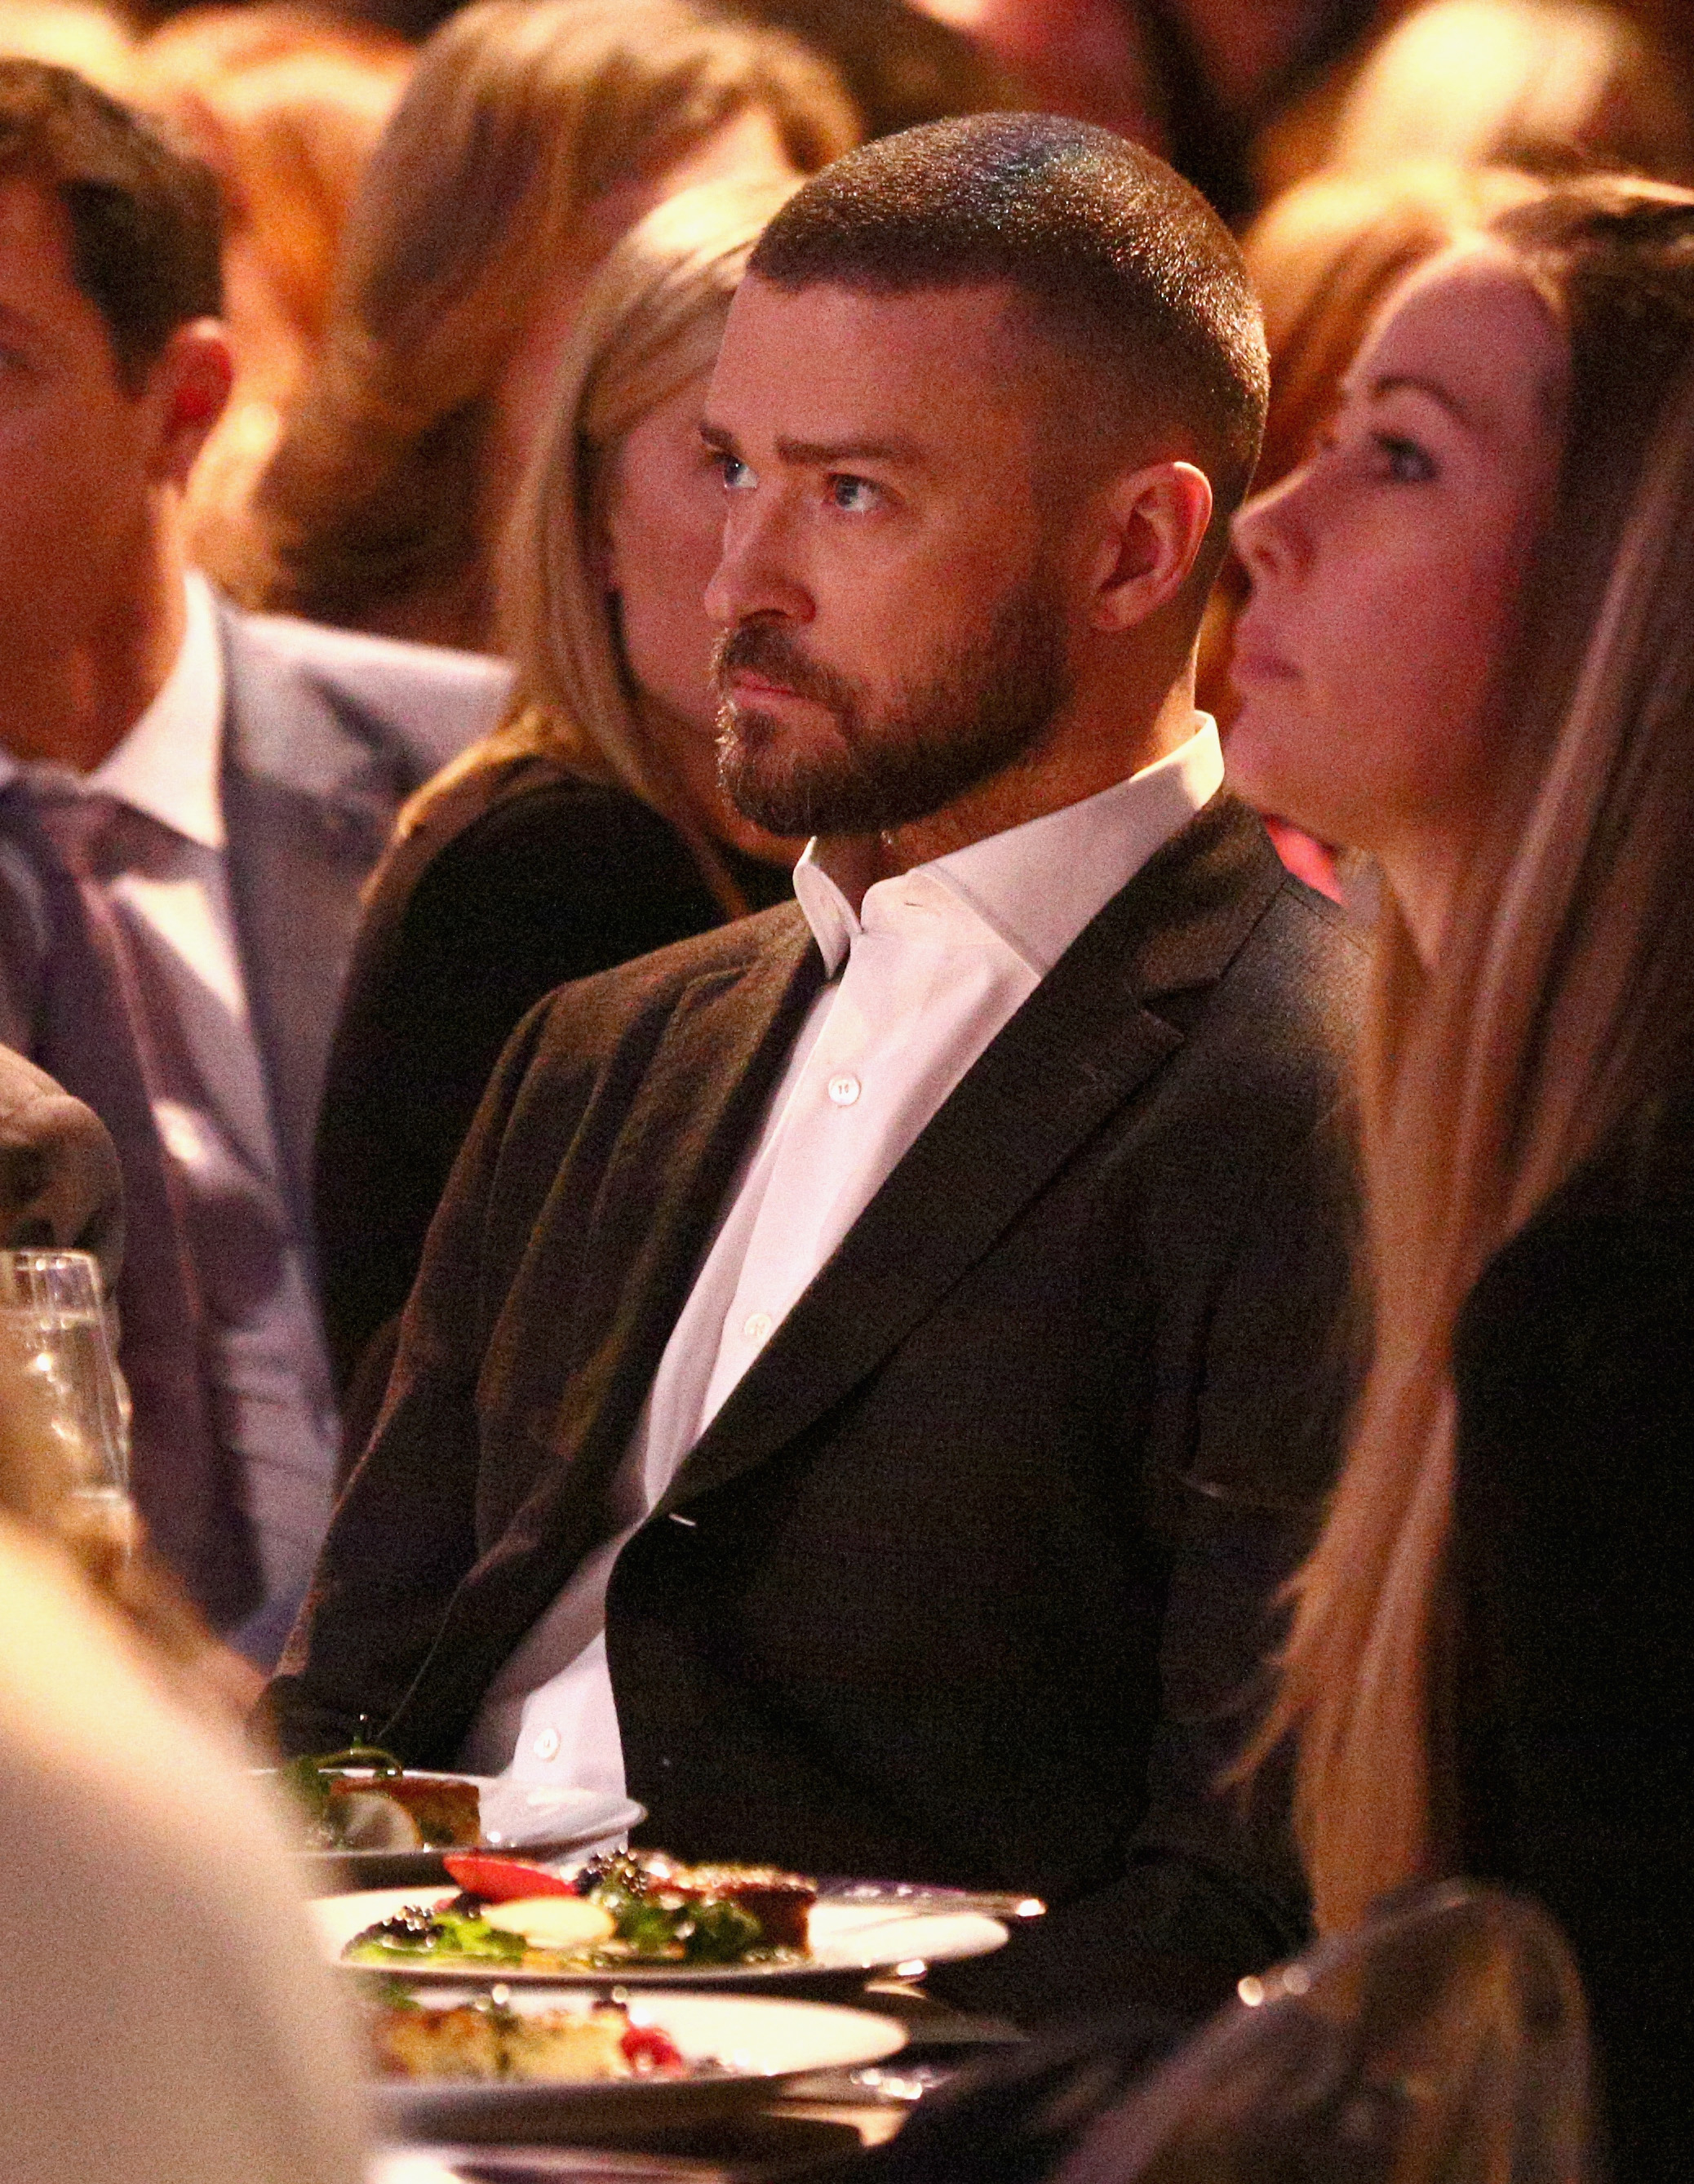 Close-up of Justin looking serious and sitting at a table